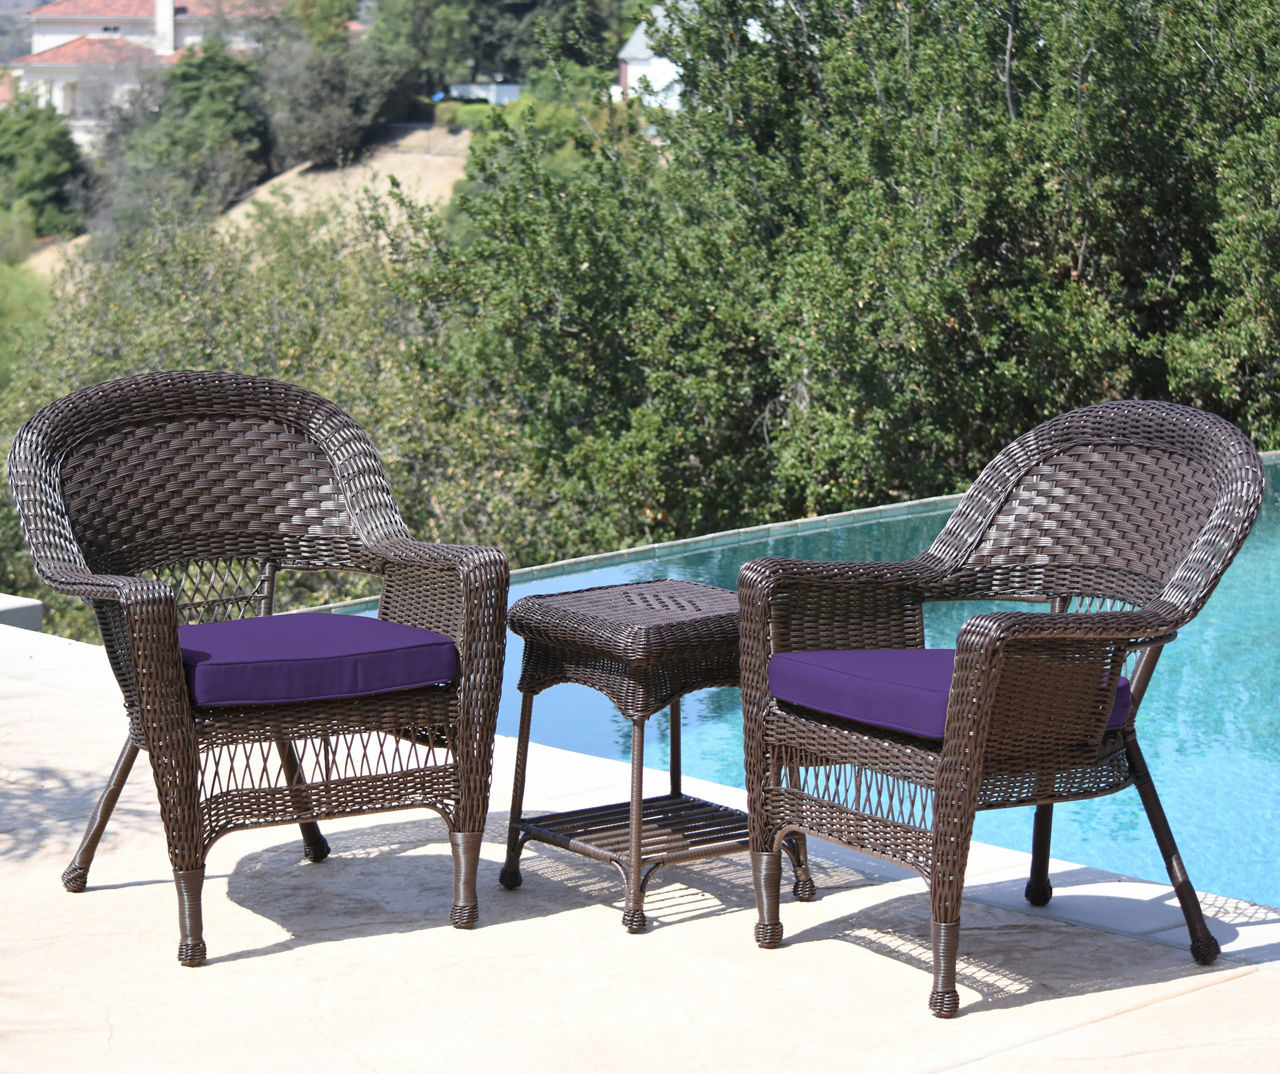 Espresso 3-Piece Patio All-Weather Wicker Chat Set with Purple Cushions